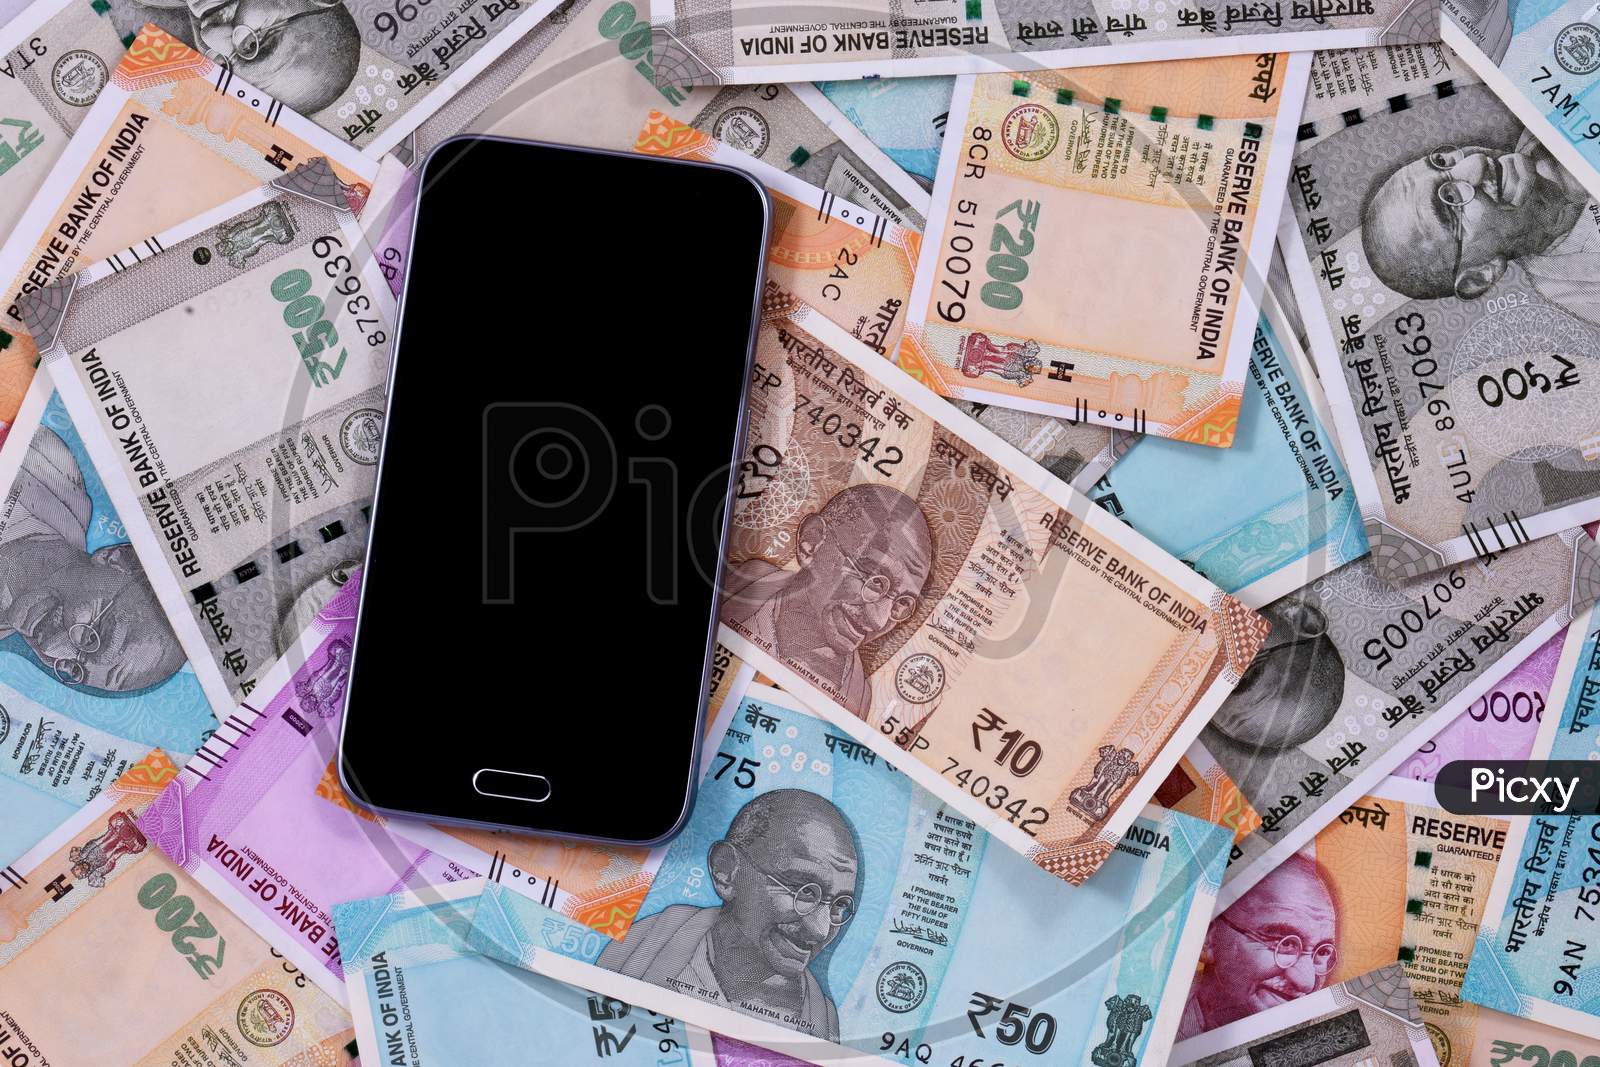 Mobile Smart Phone And Indian Rupee Notes, Digital Money,Fin-Tech,Money Making Online Concepts.